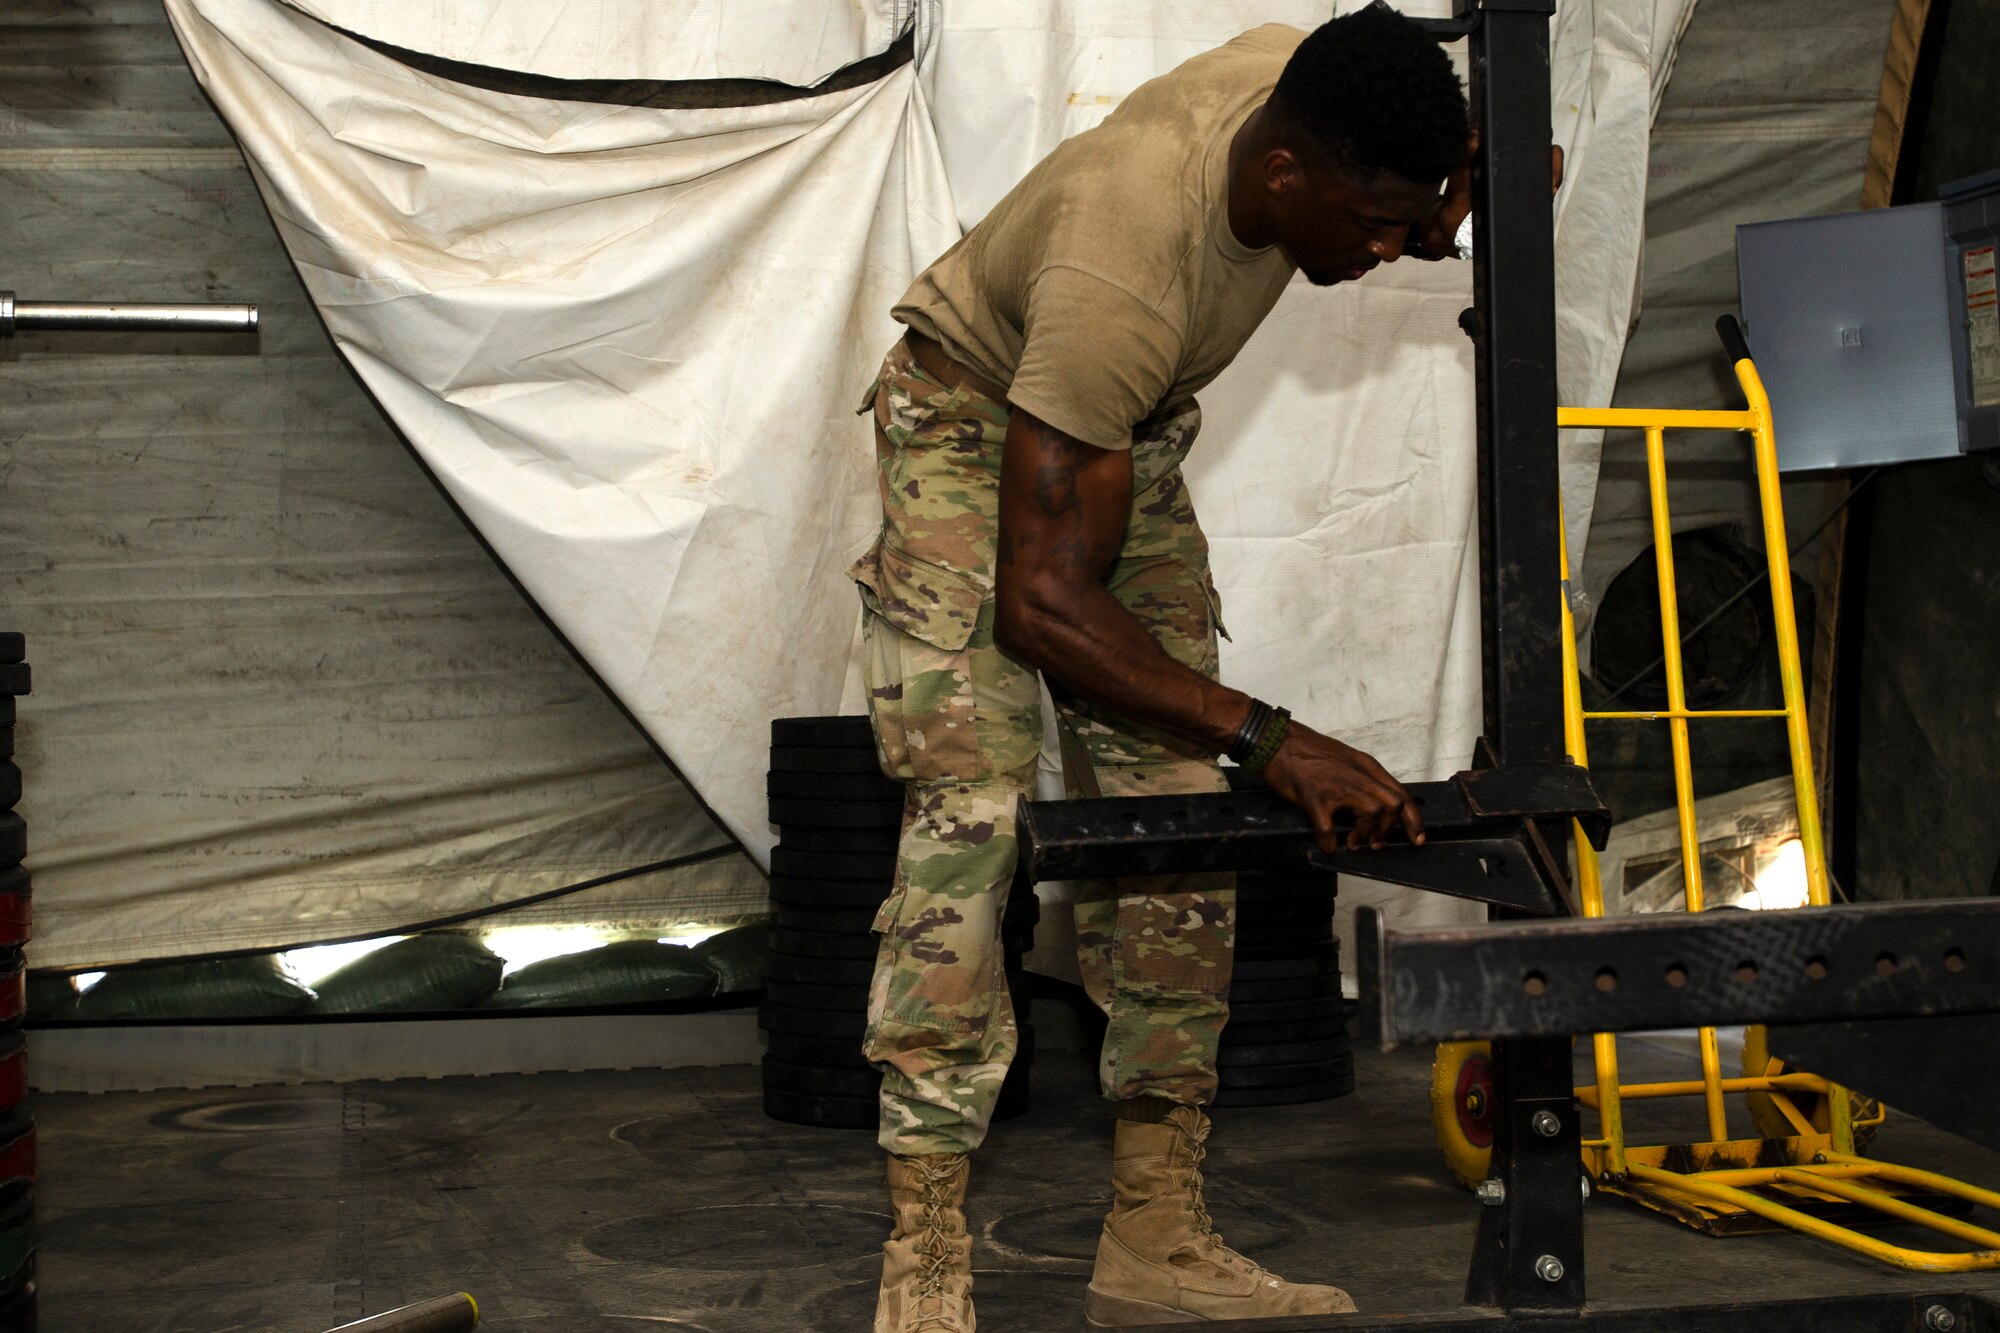 U.S. Air Force Master Sgt. Alonza Loury, 386th Expeditionary Force Support Squadron, moves workout equipment in the new fitness tent on Ali Al Salem Air Base, Kuwait, July 24, 2019. The new fitness tent is slated to open Aug.1, 2019, replacing the original facility which is scheduled for demolition to make room for future base improvement projects. This facility offers Airmen a second fitness location and expected to be in use until mid-November when the more permanent structure is completed. (U.S. Air Force photo by Capt. Stephen Hudson)